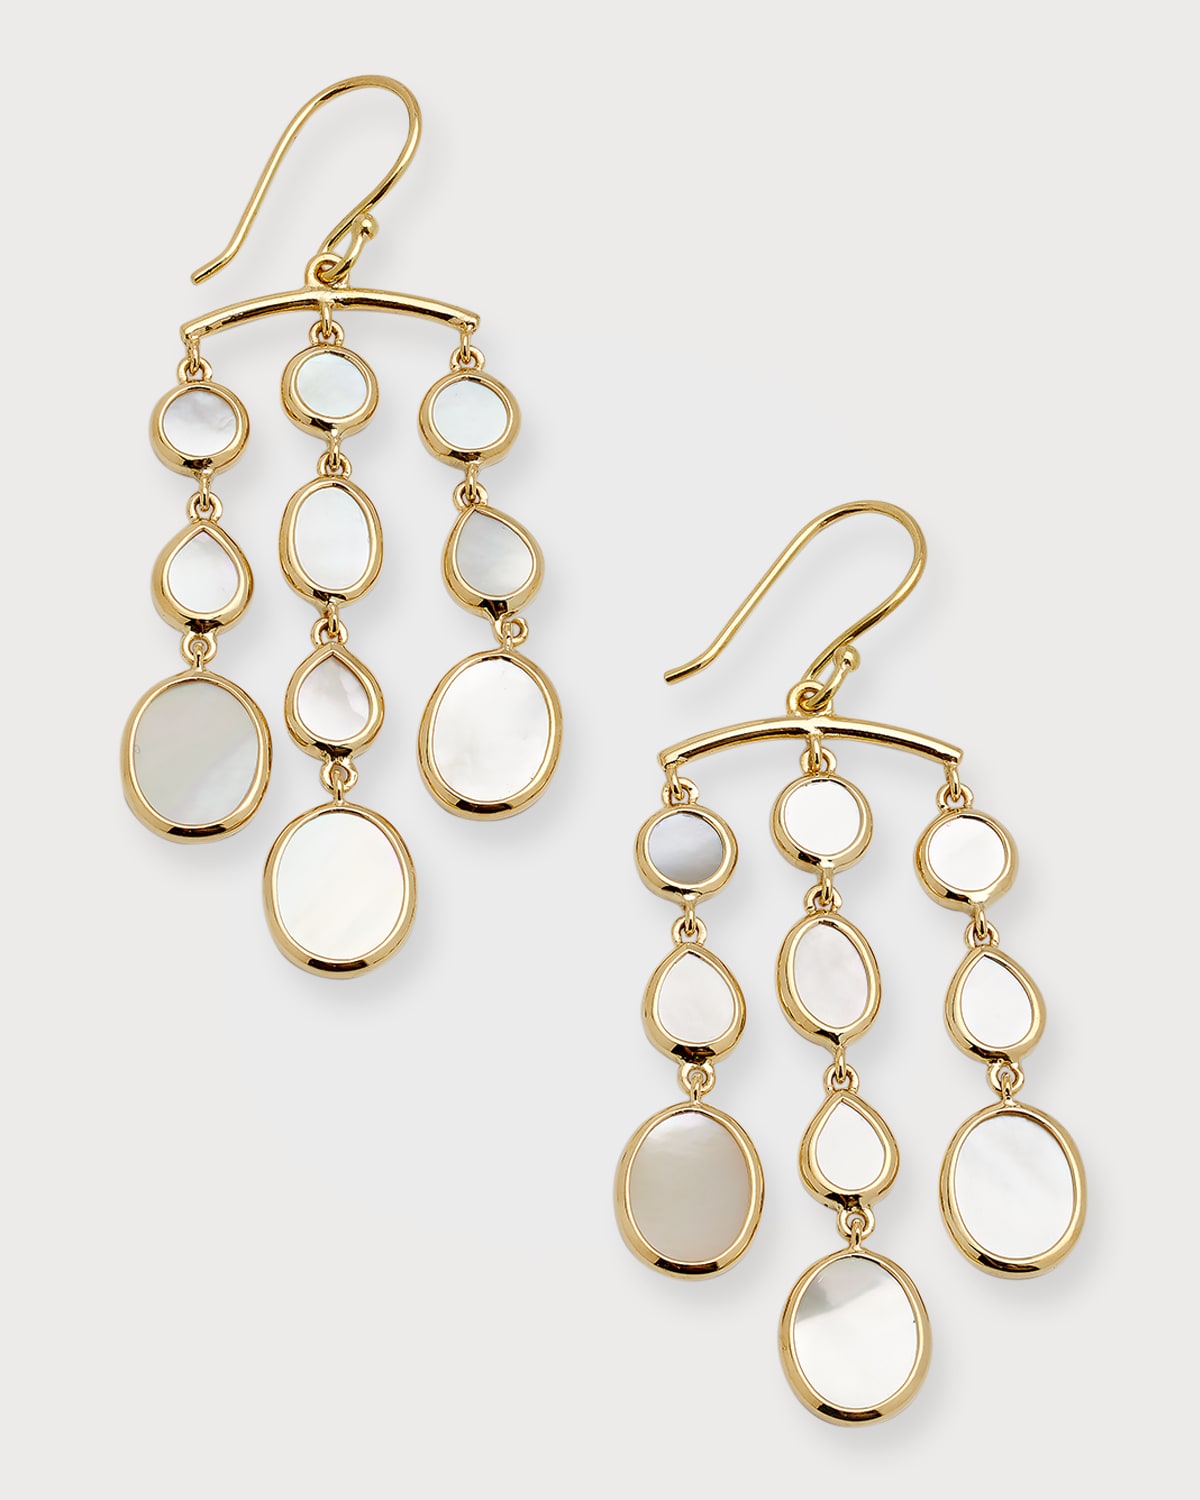 IPPOLITA 18K POLISHED ROCK CANDY SMALL CHANDELIER EARRINGS IN MOTHER-OF-PEARL